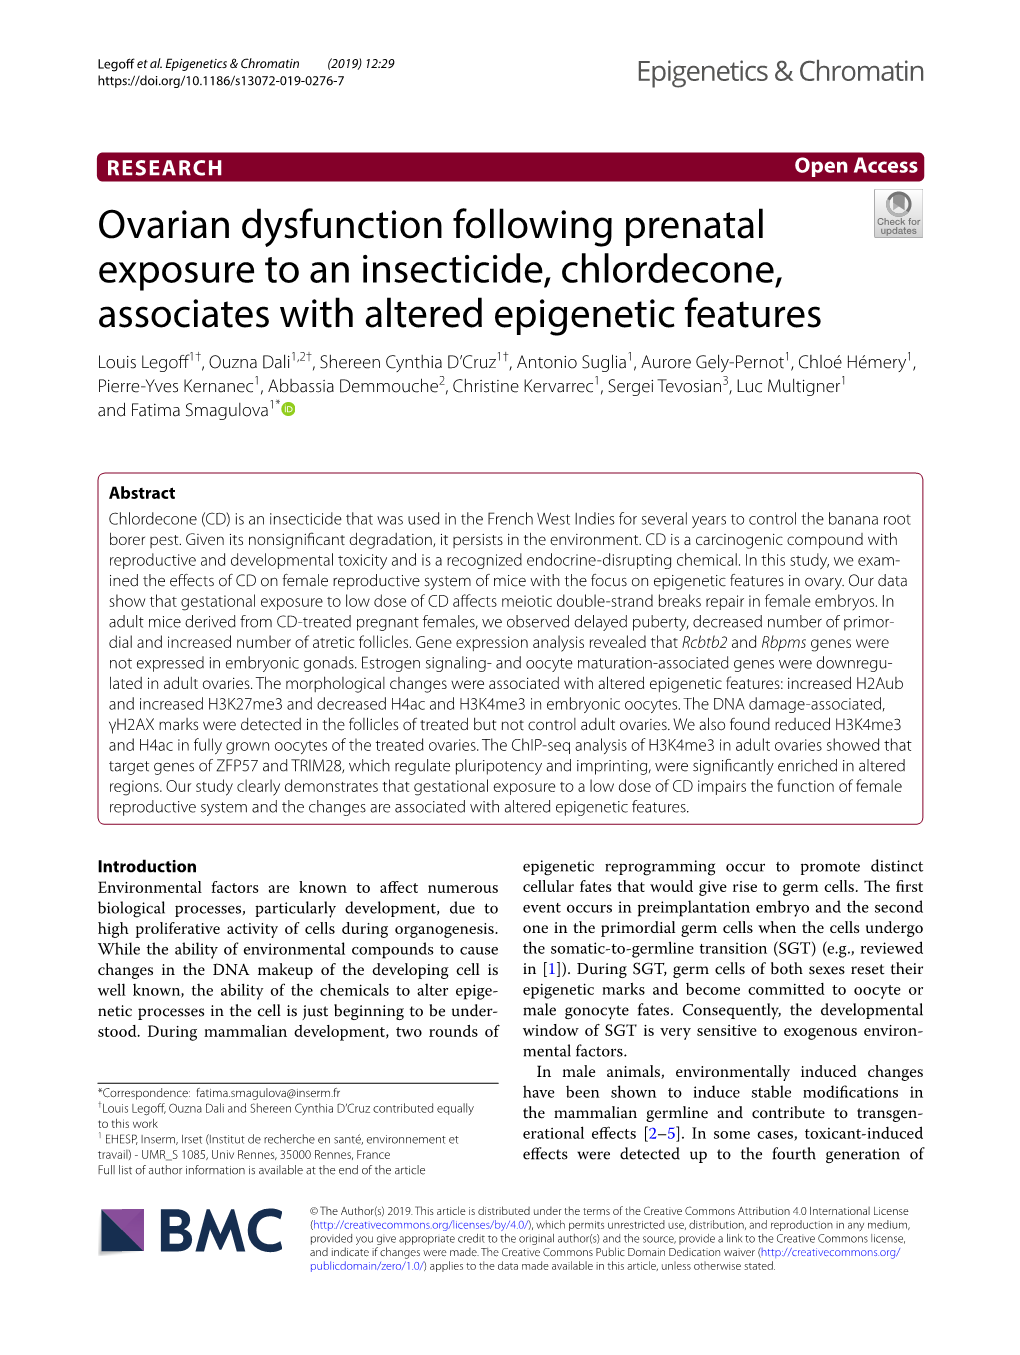 Ovarian Dysfunction Following Prenatal Exposure to an Insecticide